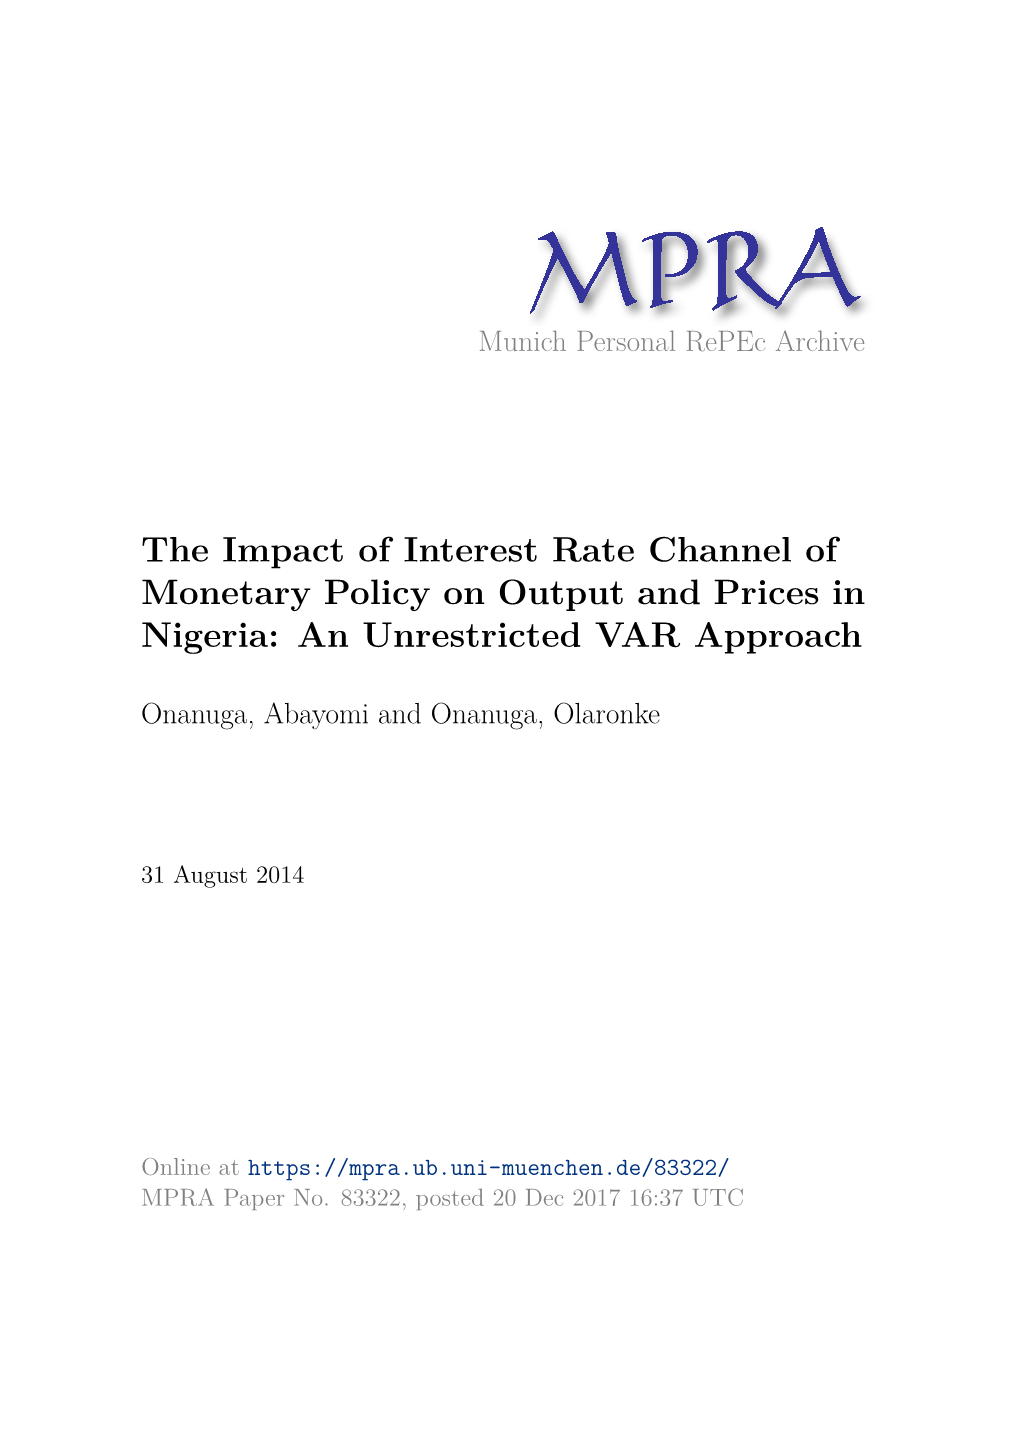 The Impact of Interest Rate Channel of Monetary Policy on Output and Prices in Nigeria: an Unrestricted VAR Approach